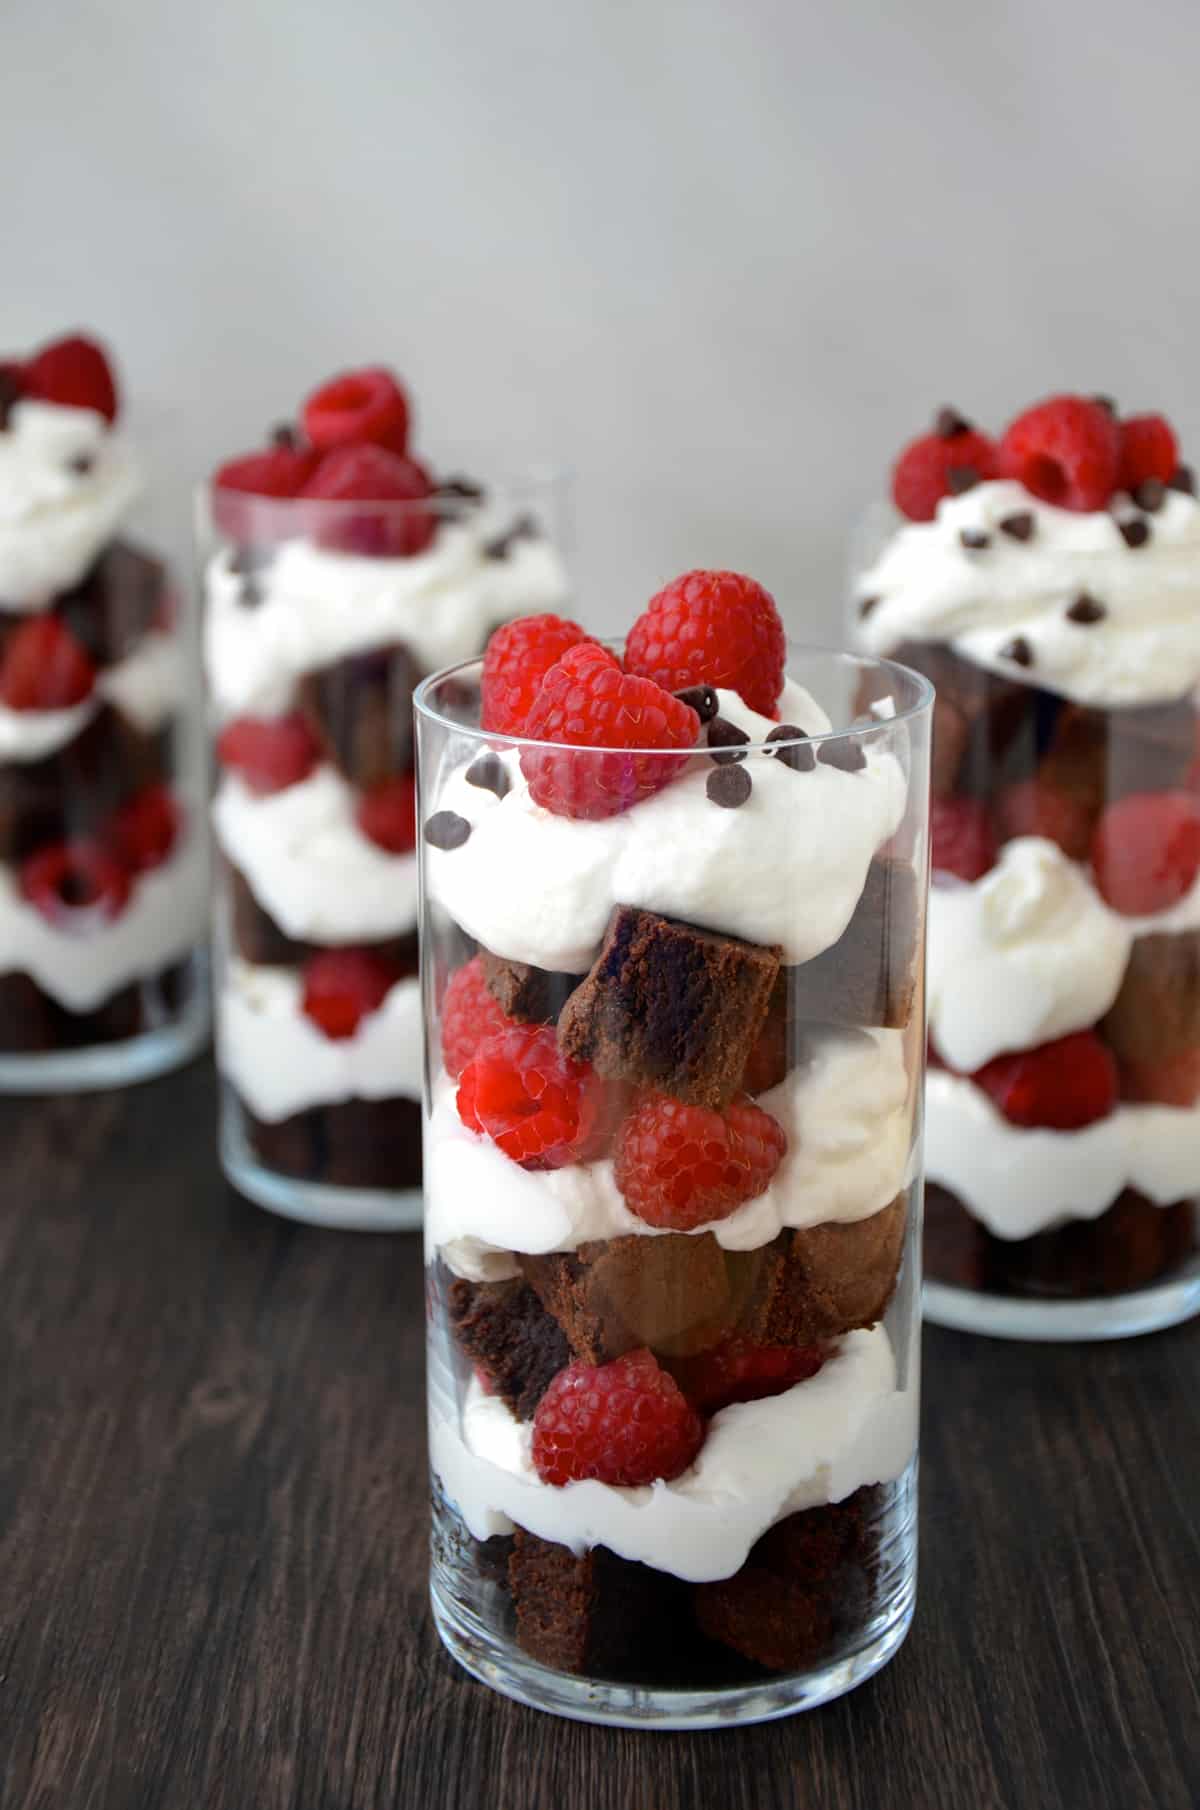 Several parfait glasses filled with layers of brownie pieces, whipped cream and fresh raspberries.